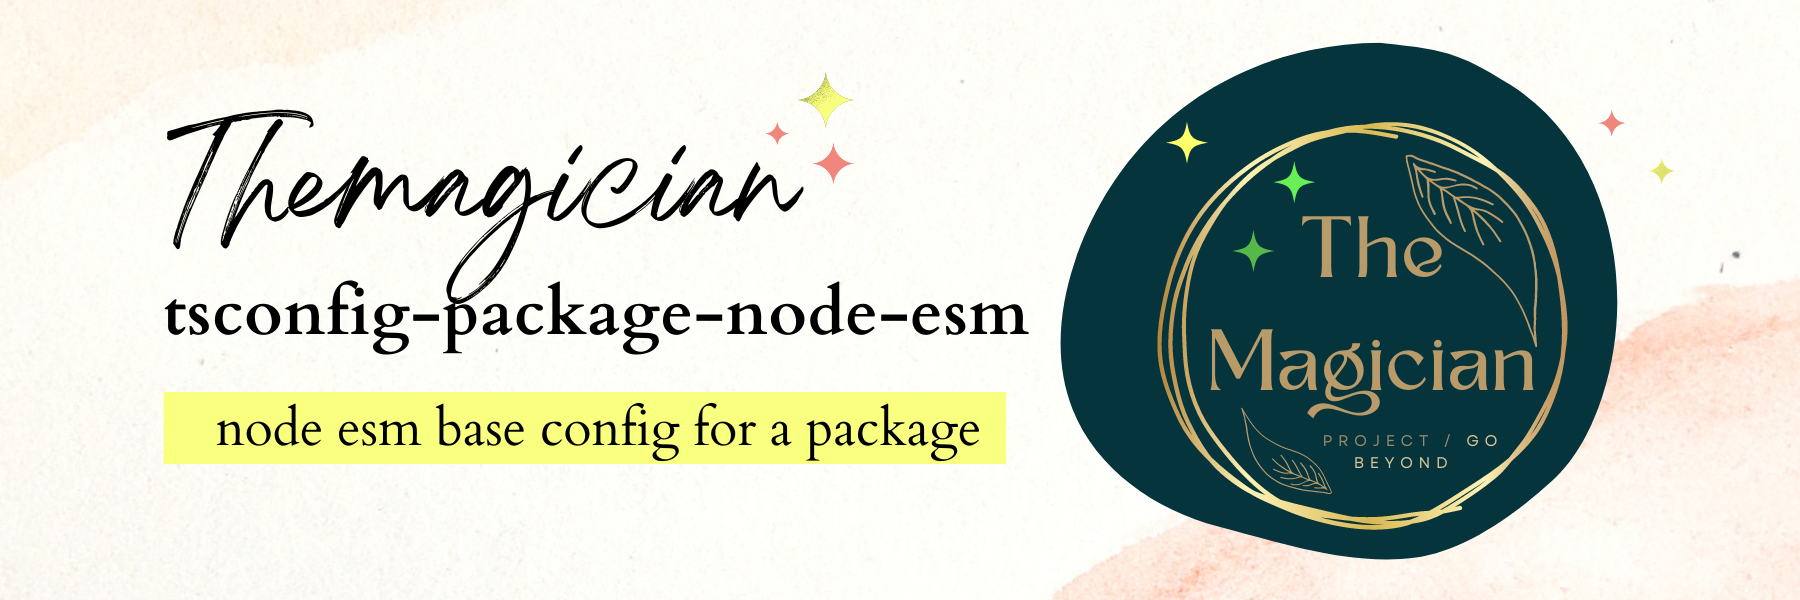 the magician tsconfig-package-node-esm banner